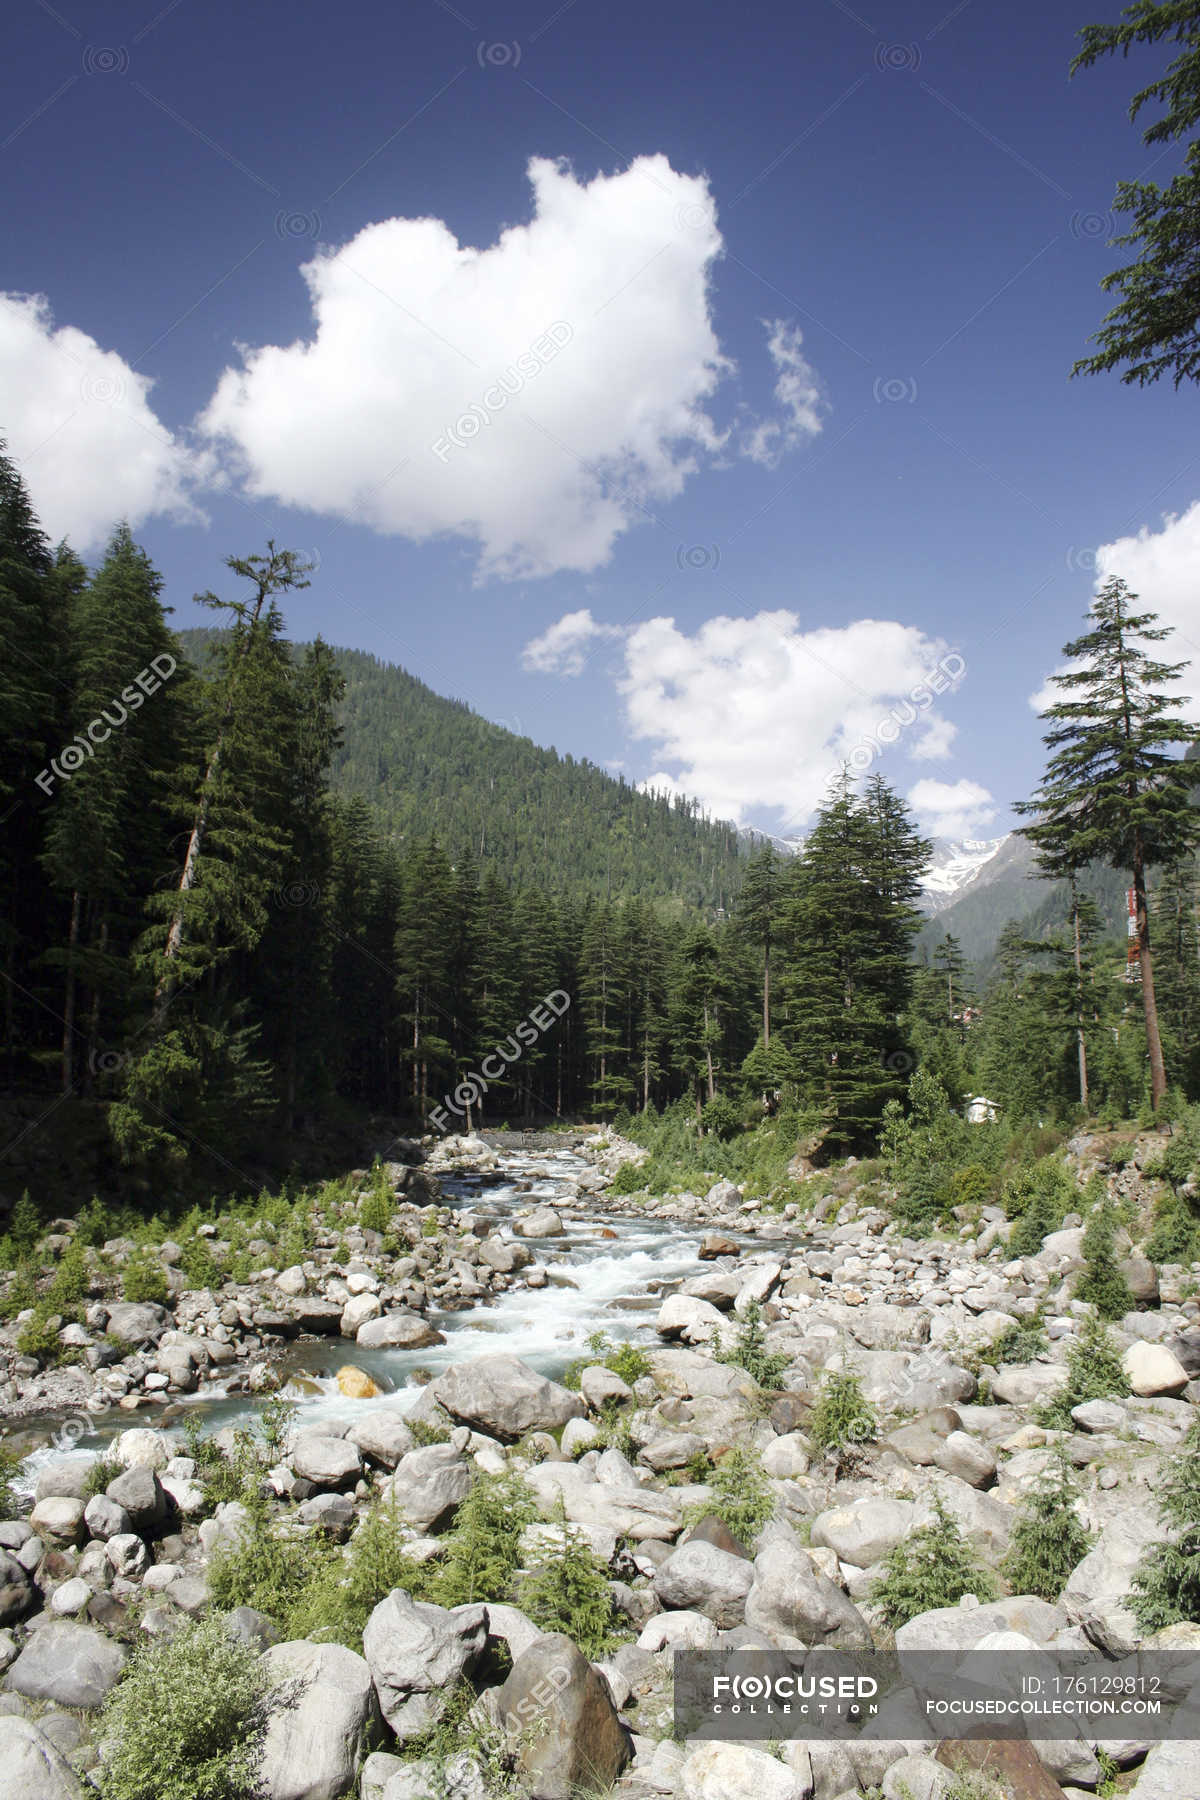 View of Landscape with trees and hills on background during daytime,  Manali, Himachal Pradesh, India, Asia. — cleanness, journey - Stock Photo |  #176129812